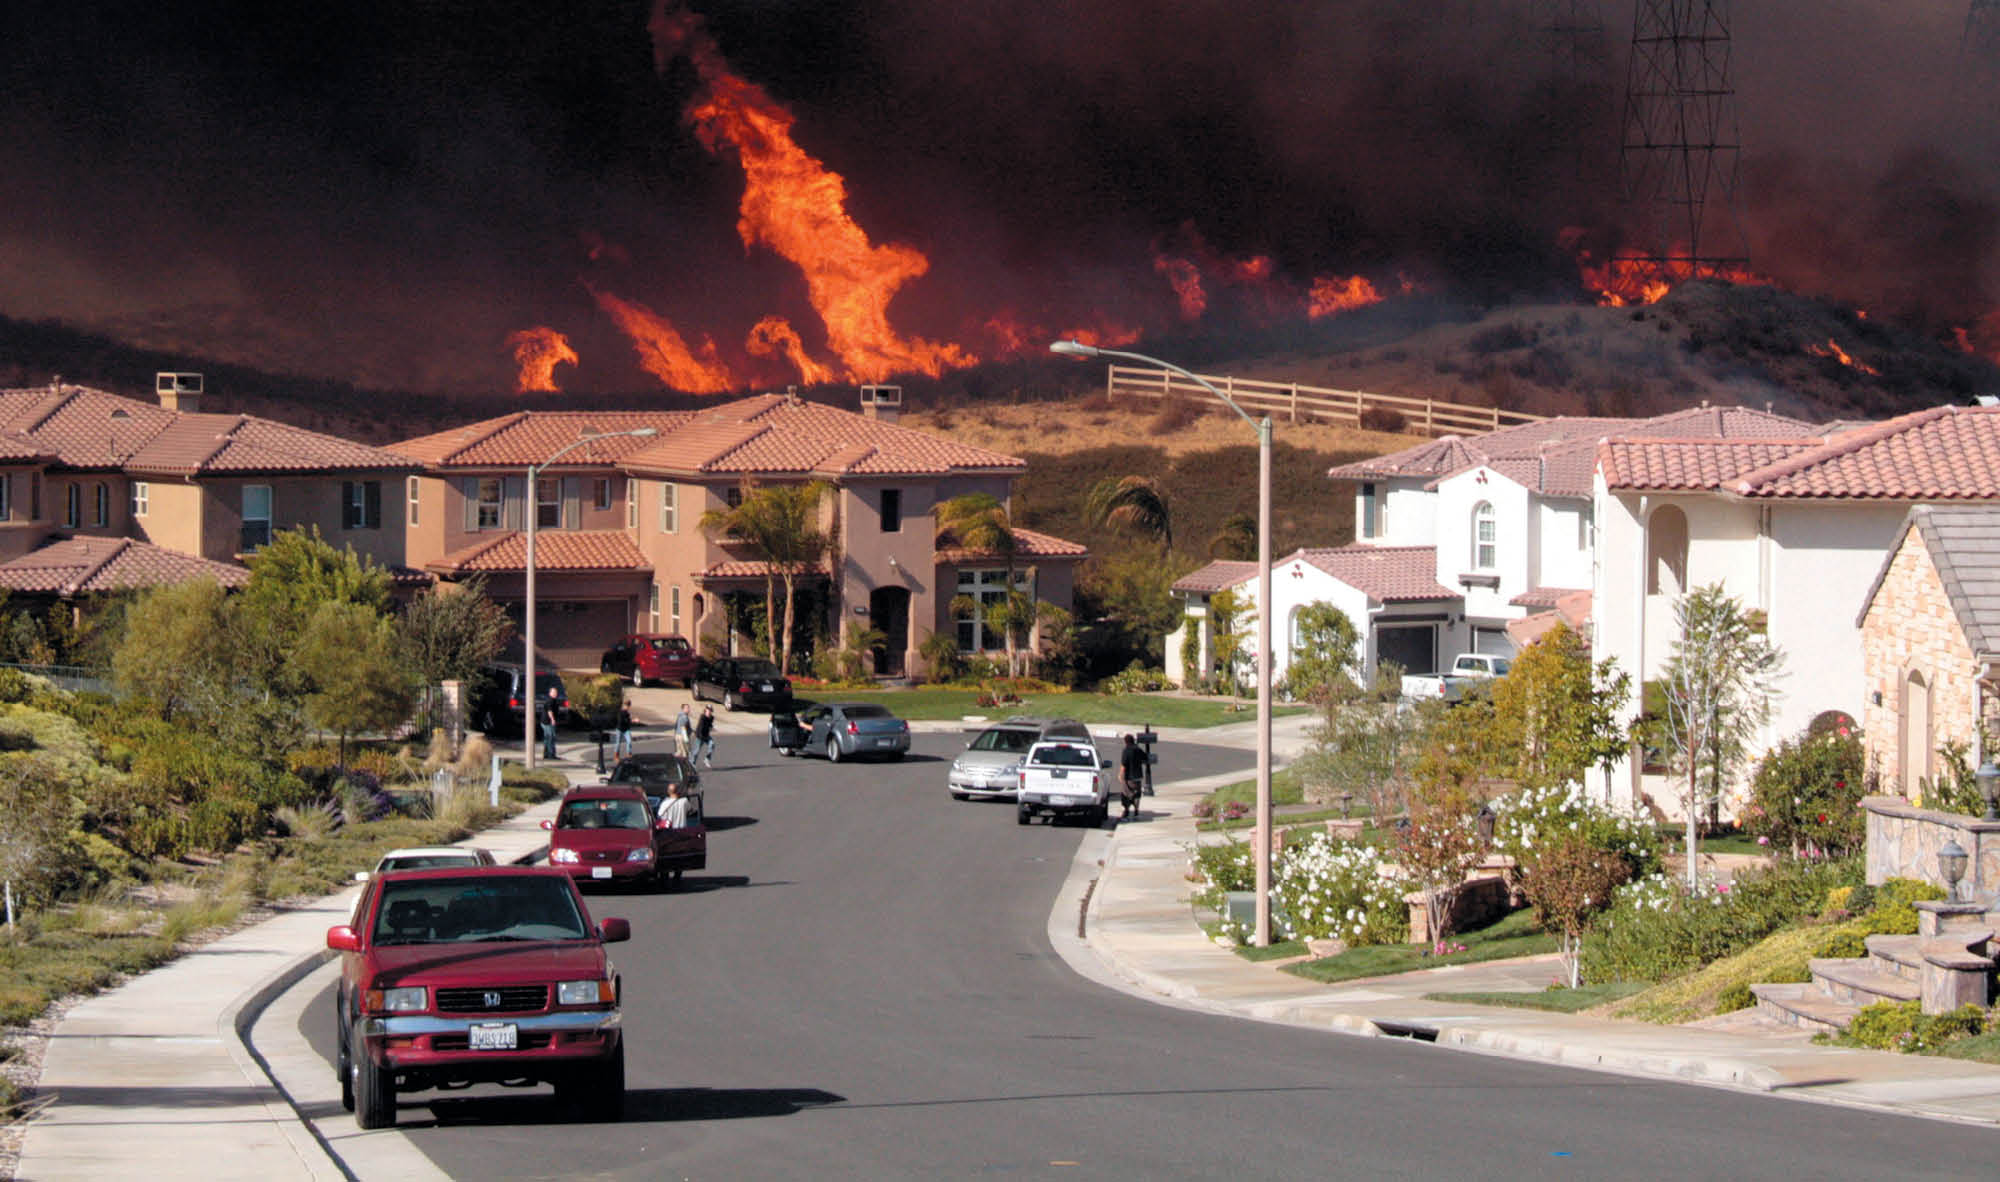 Southern California houses threatened by wildfires, October 2007.